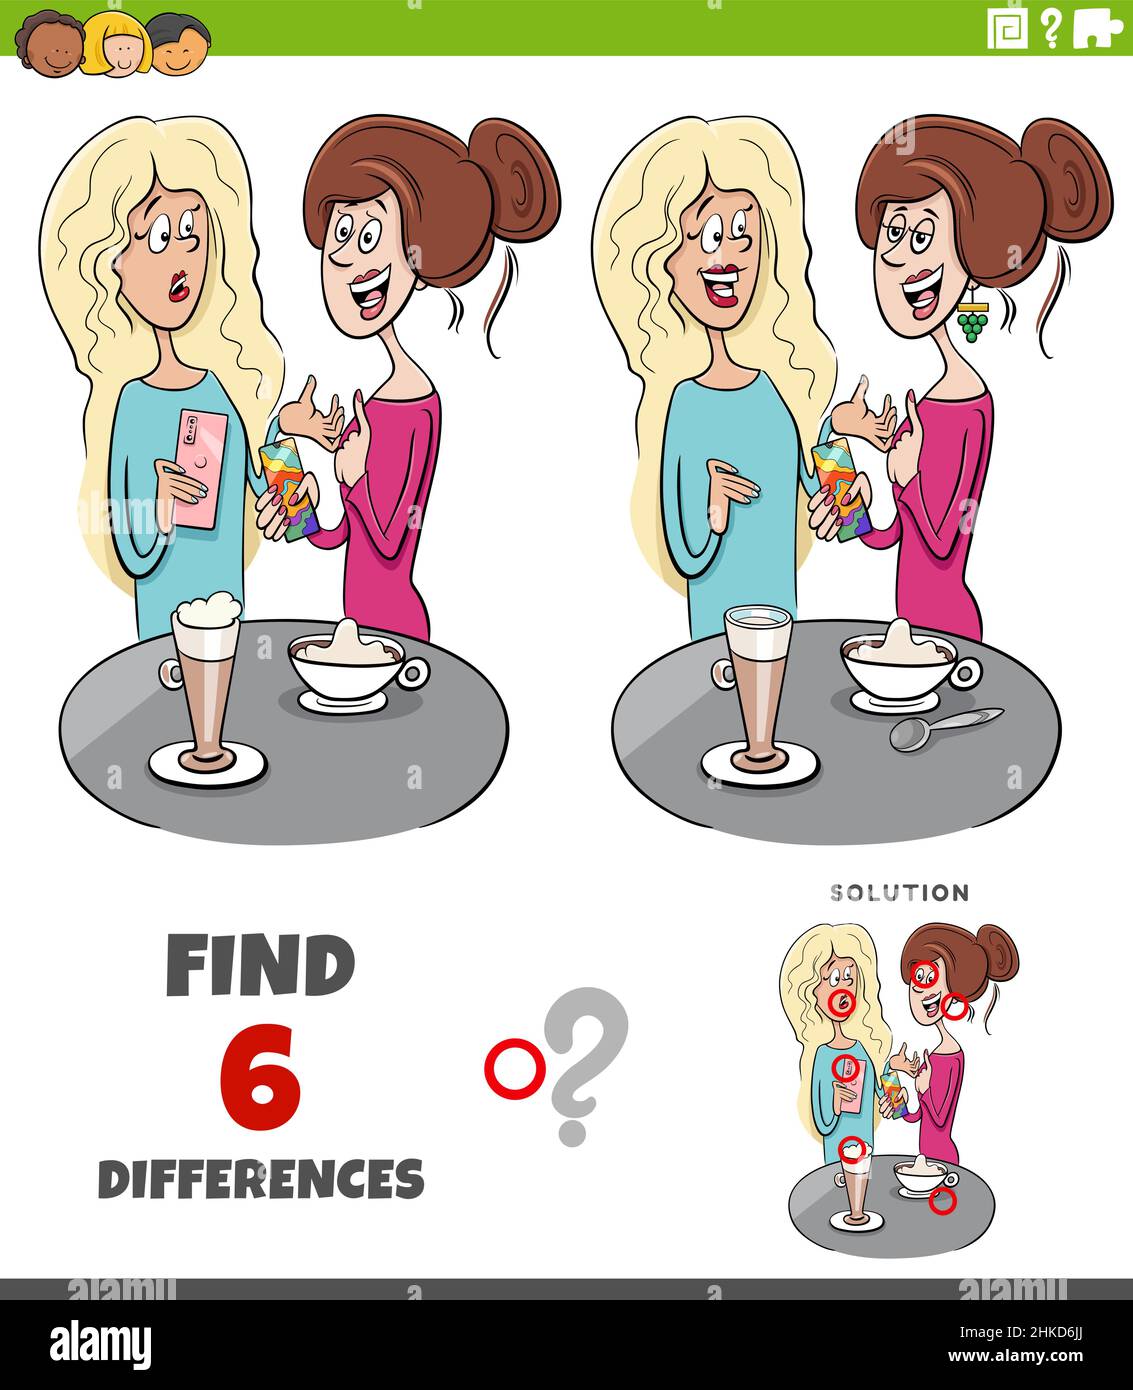 Cartoon Illustration Of Finding The Differences Between Pictures